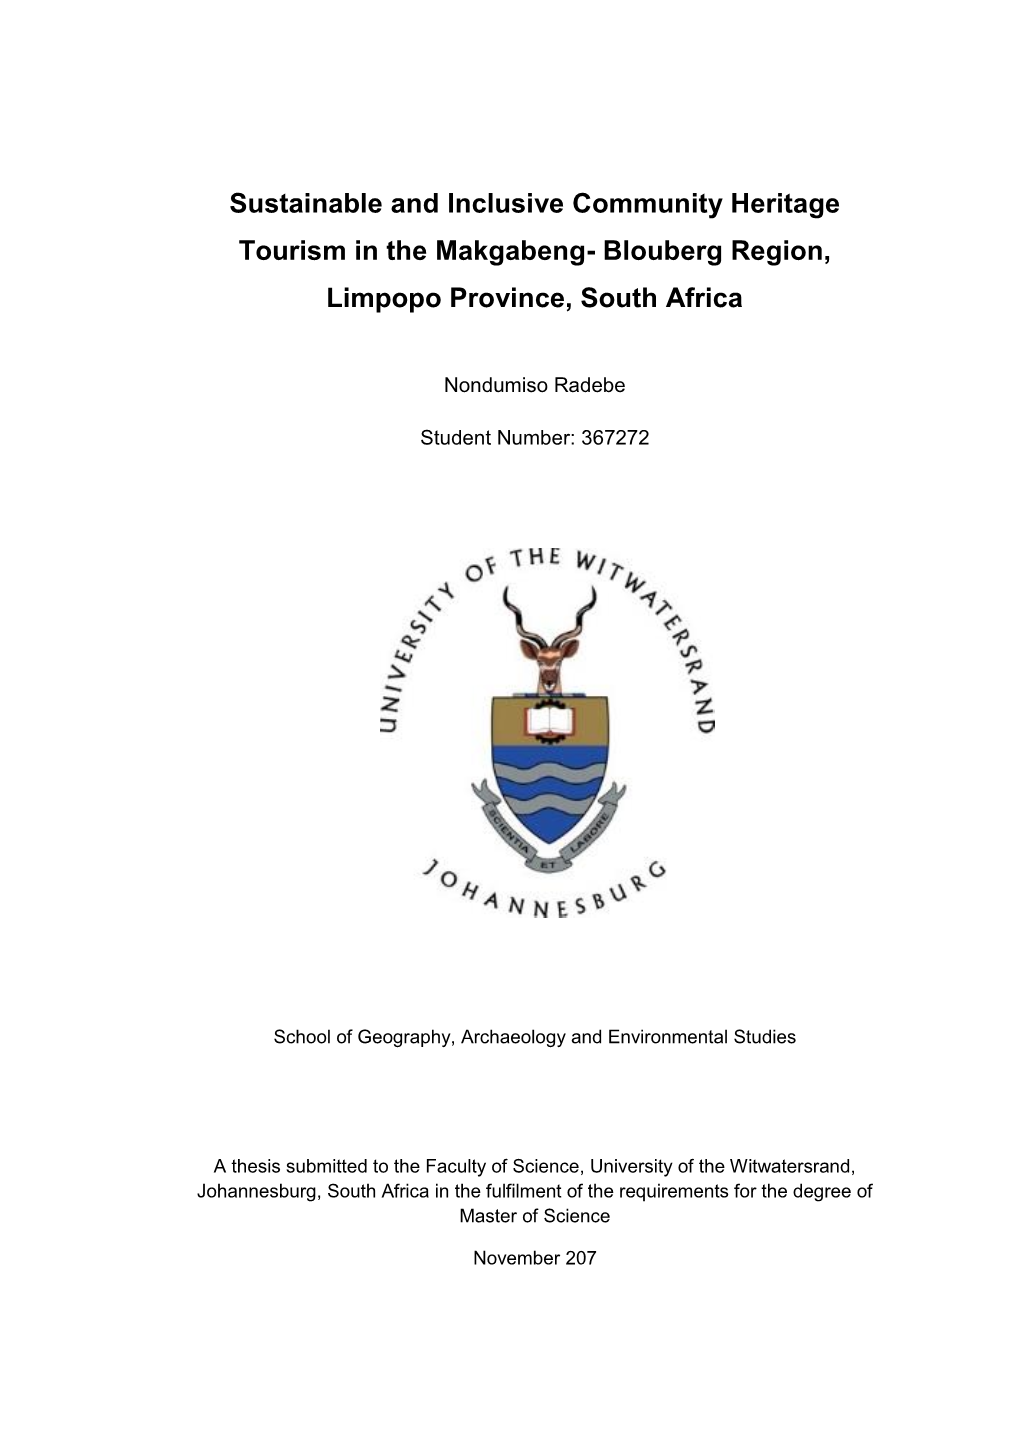 Sustainable and Inclusive Community Heritage Tourism in the Makgabeng- Blouberg Region, Limpopo Province, South Africa